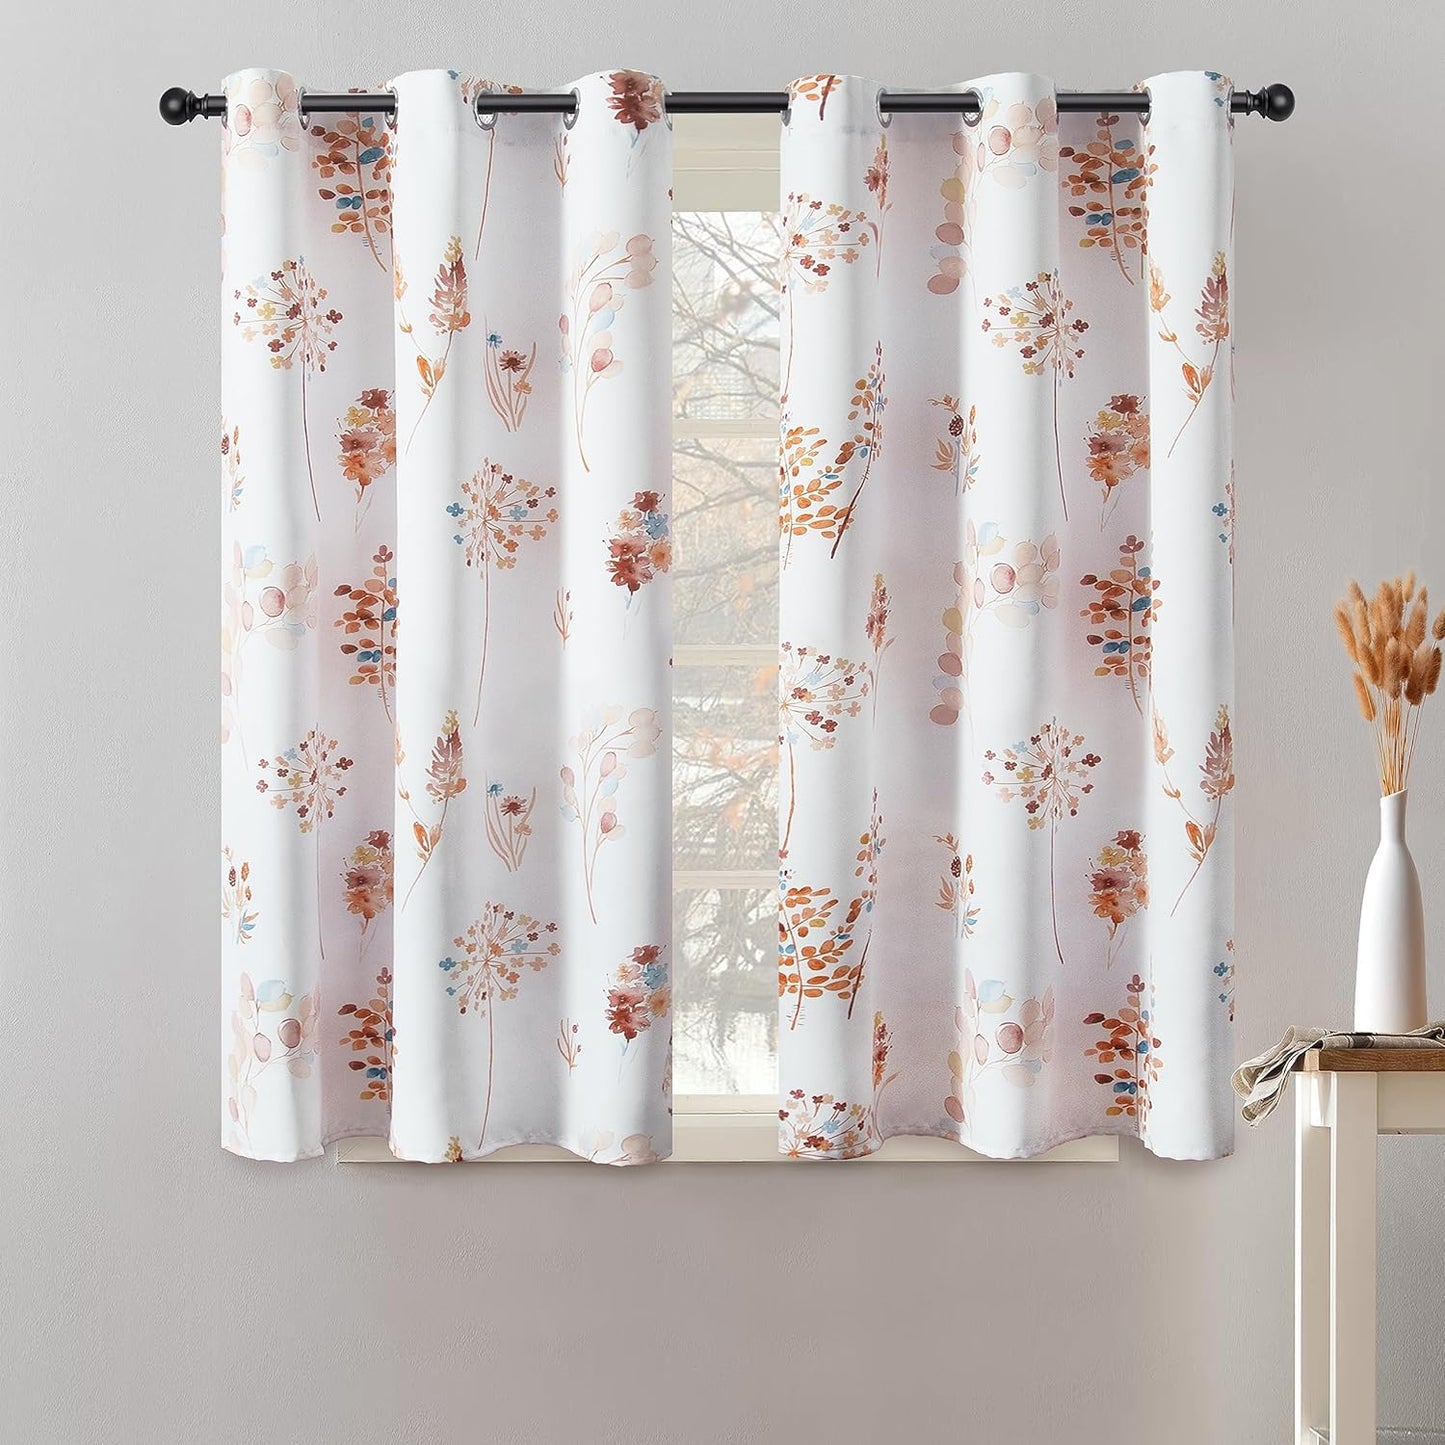 XTMYI 63 Inch Length Sage Green Window Curtains for Bedroom 2 Panels,Room Darkening Watercolor Floral Leaves 80% Blackout Flowered Printed Curtains for Living Room with Grommet,1 Pair Set  XTMYI Orange  Blue 34"X45" 